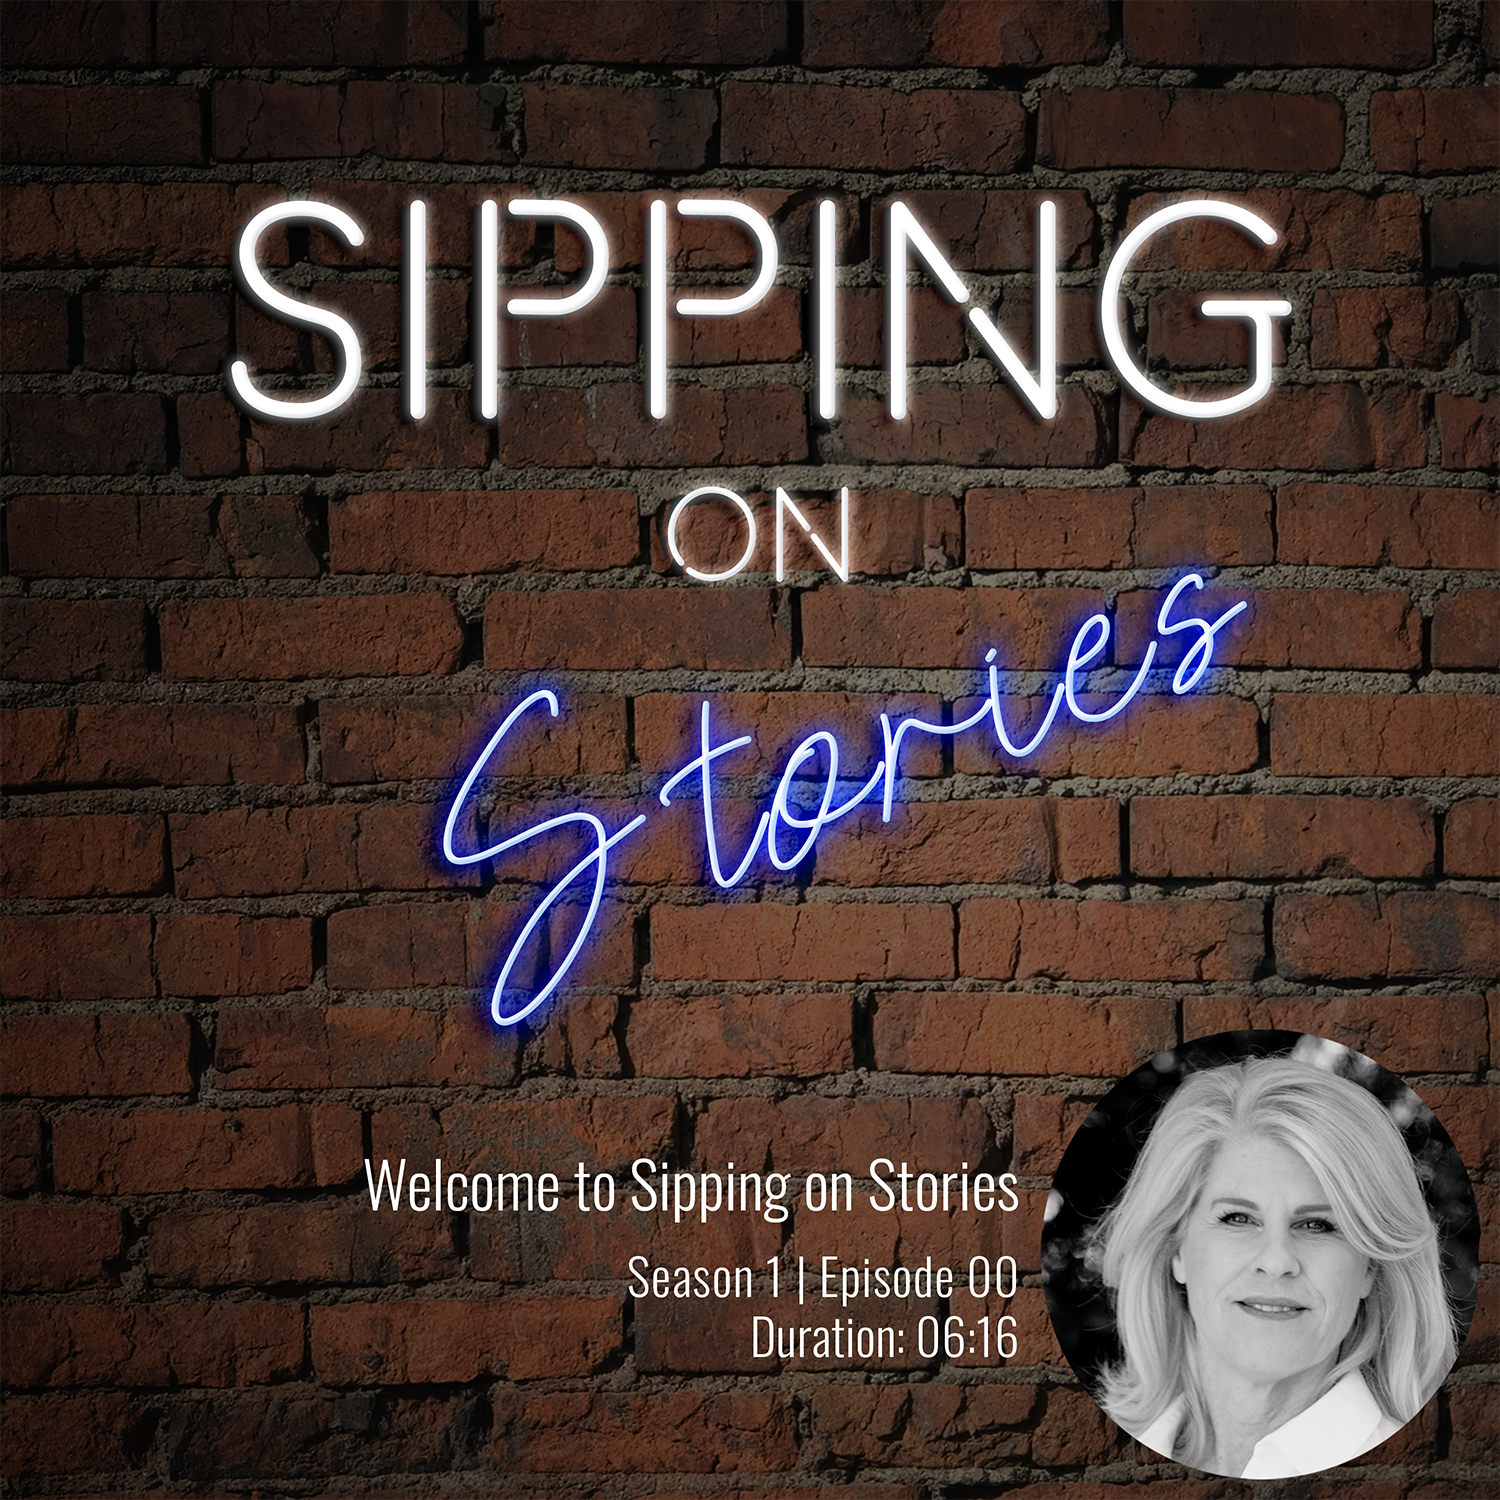 Welcome to Sipping on Stories